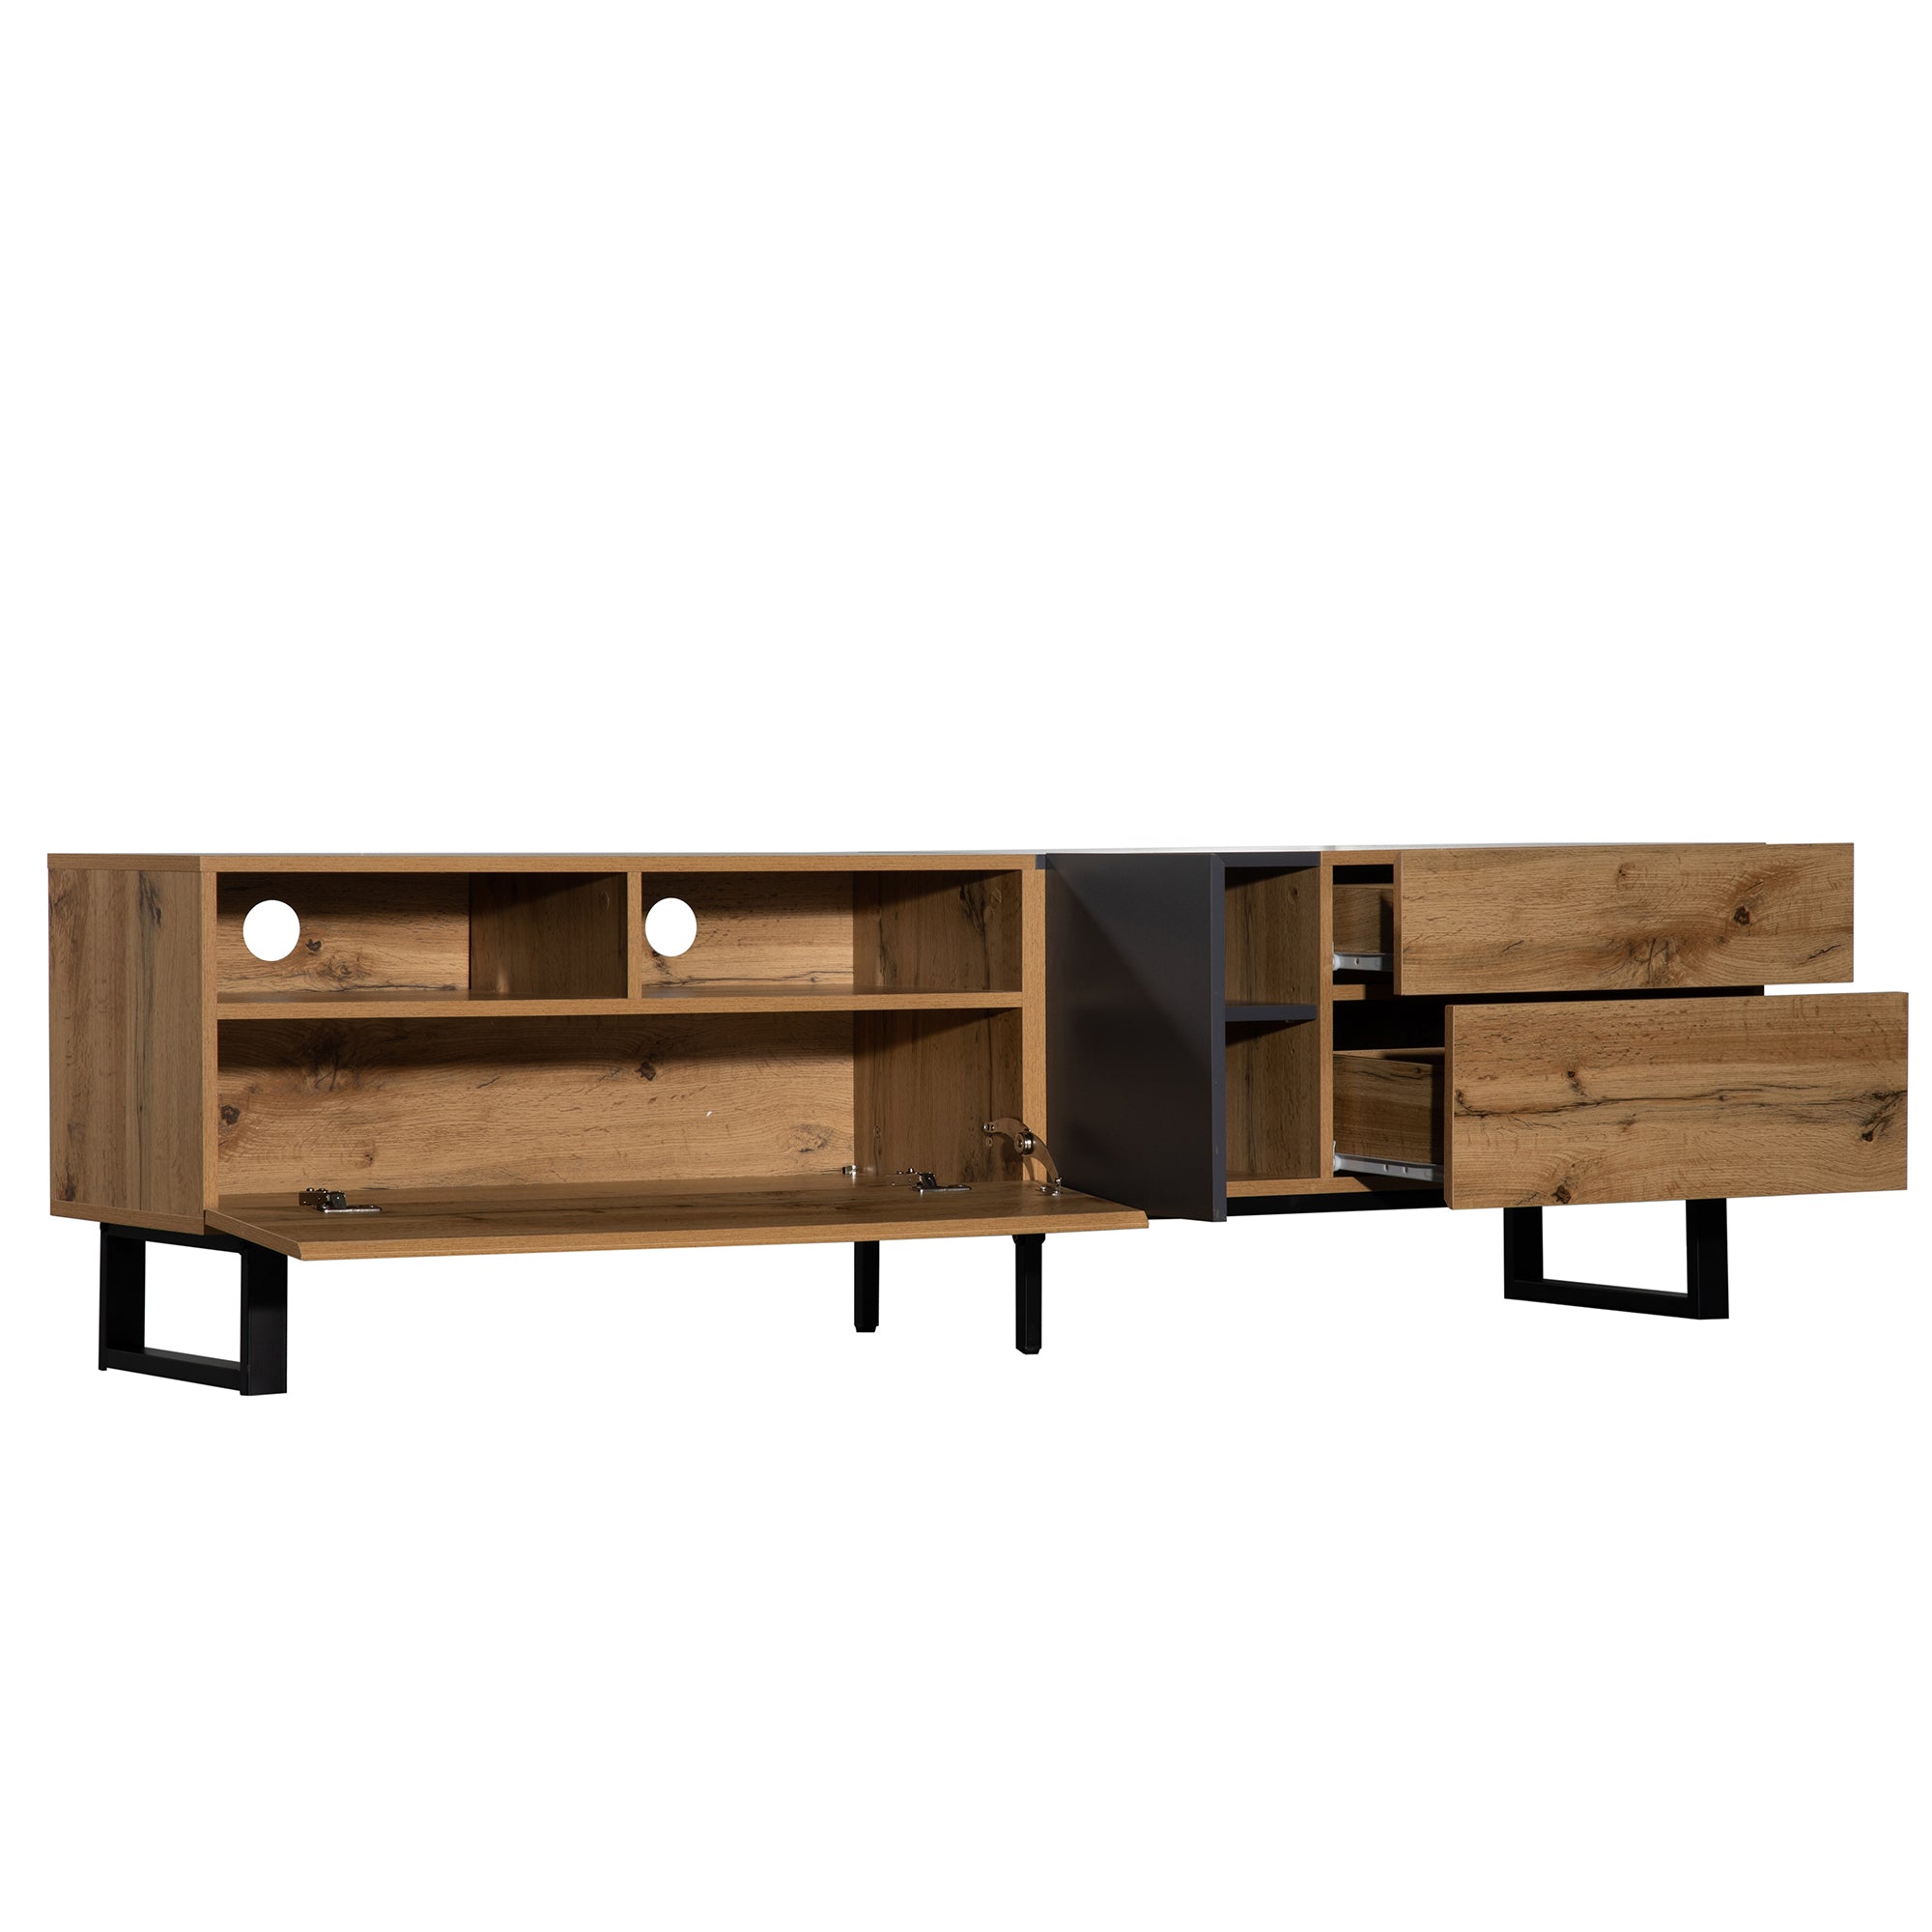 Modern TV Stand for 80'' TV with Double Storage Space wood-primary living space-70-79 inches-70-79